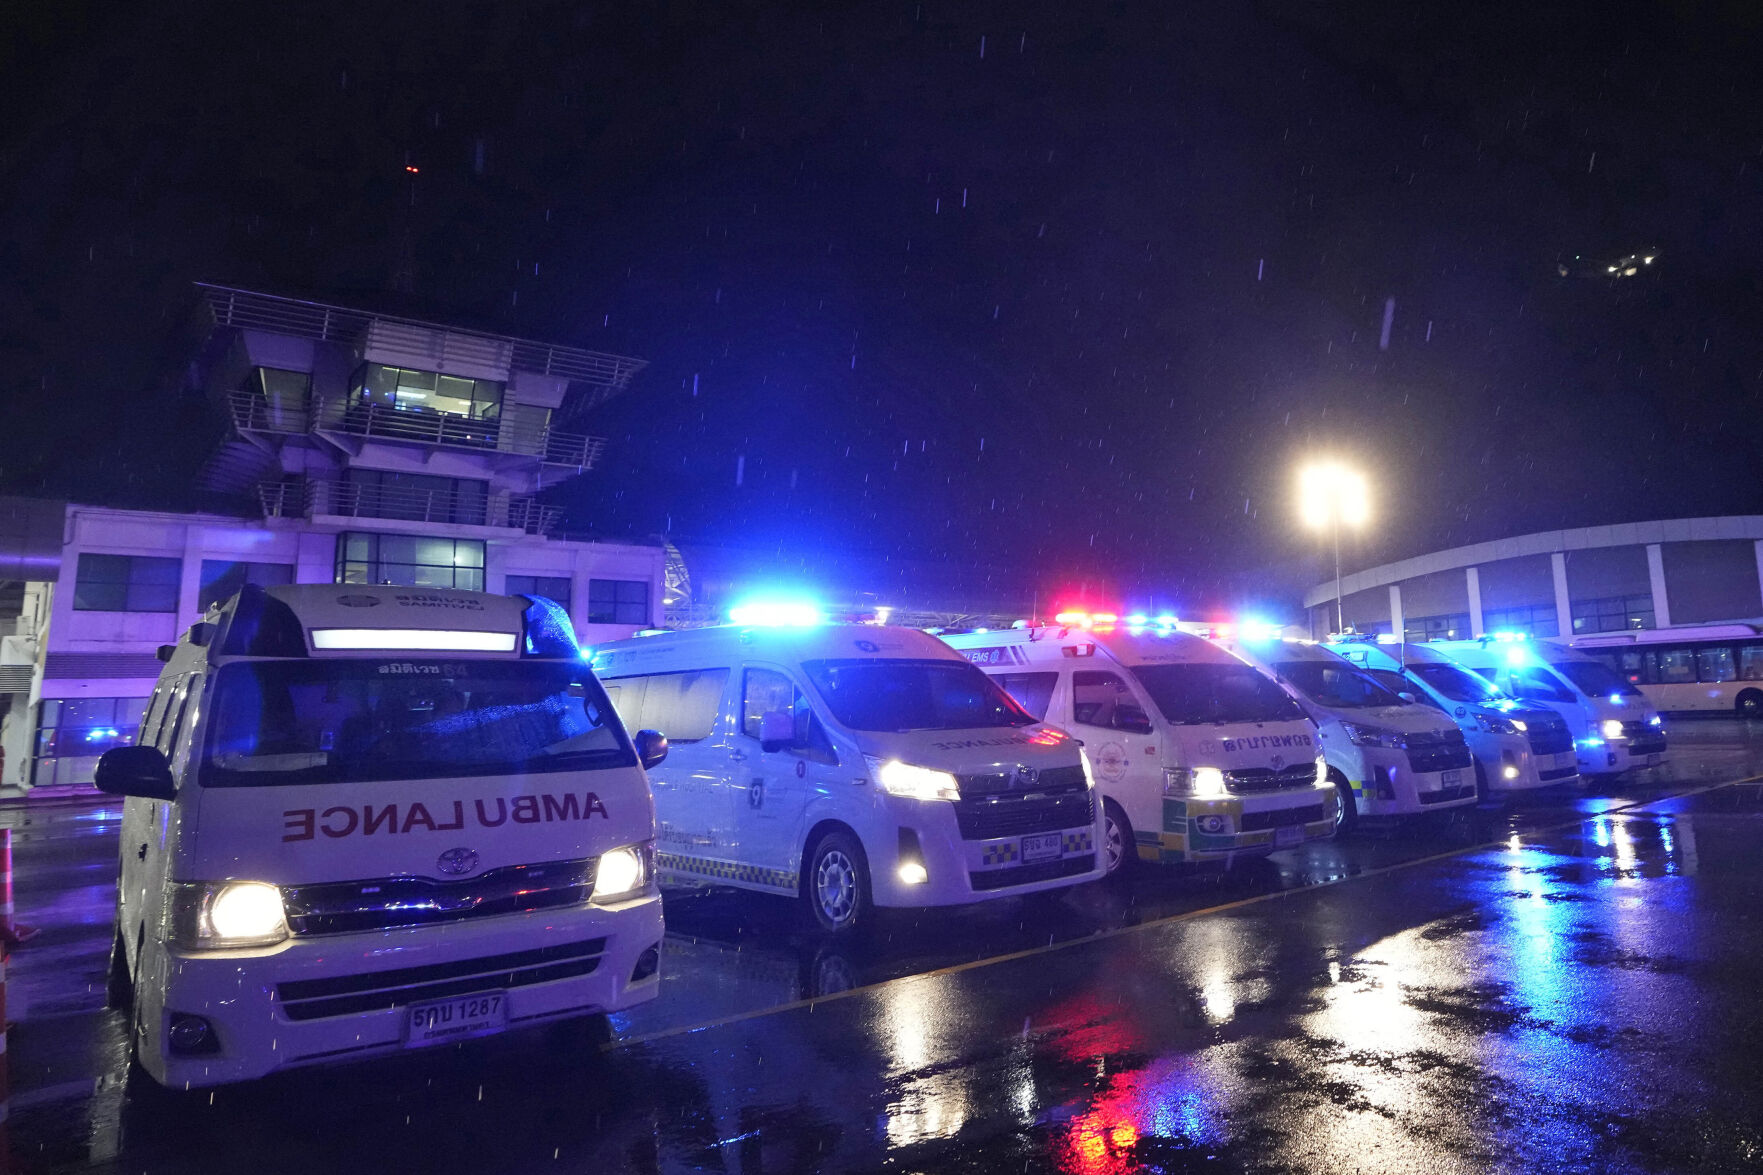 <p>Ambulances wait to carry passengers from a London-Singapore flight that encountered severe turbulence, in Bangkok, Thailand, Tuesday, May 21, 2024. The plane apparently plummeted for a number of minutes before it was diverted to Bangkok, where emergency crews rushed to help injured passengers amid stormy weather, Singapore Airlines said Tuesday. (AP Photo/Sakchai Lalit)</p>   PHOTO CREDIT: Sakchai Lalit